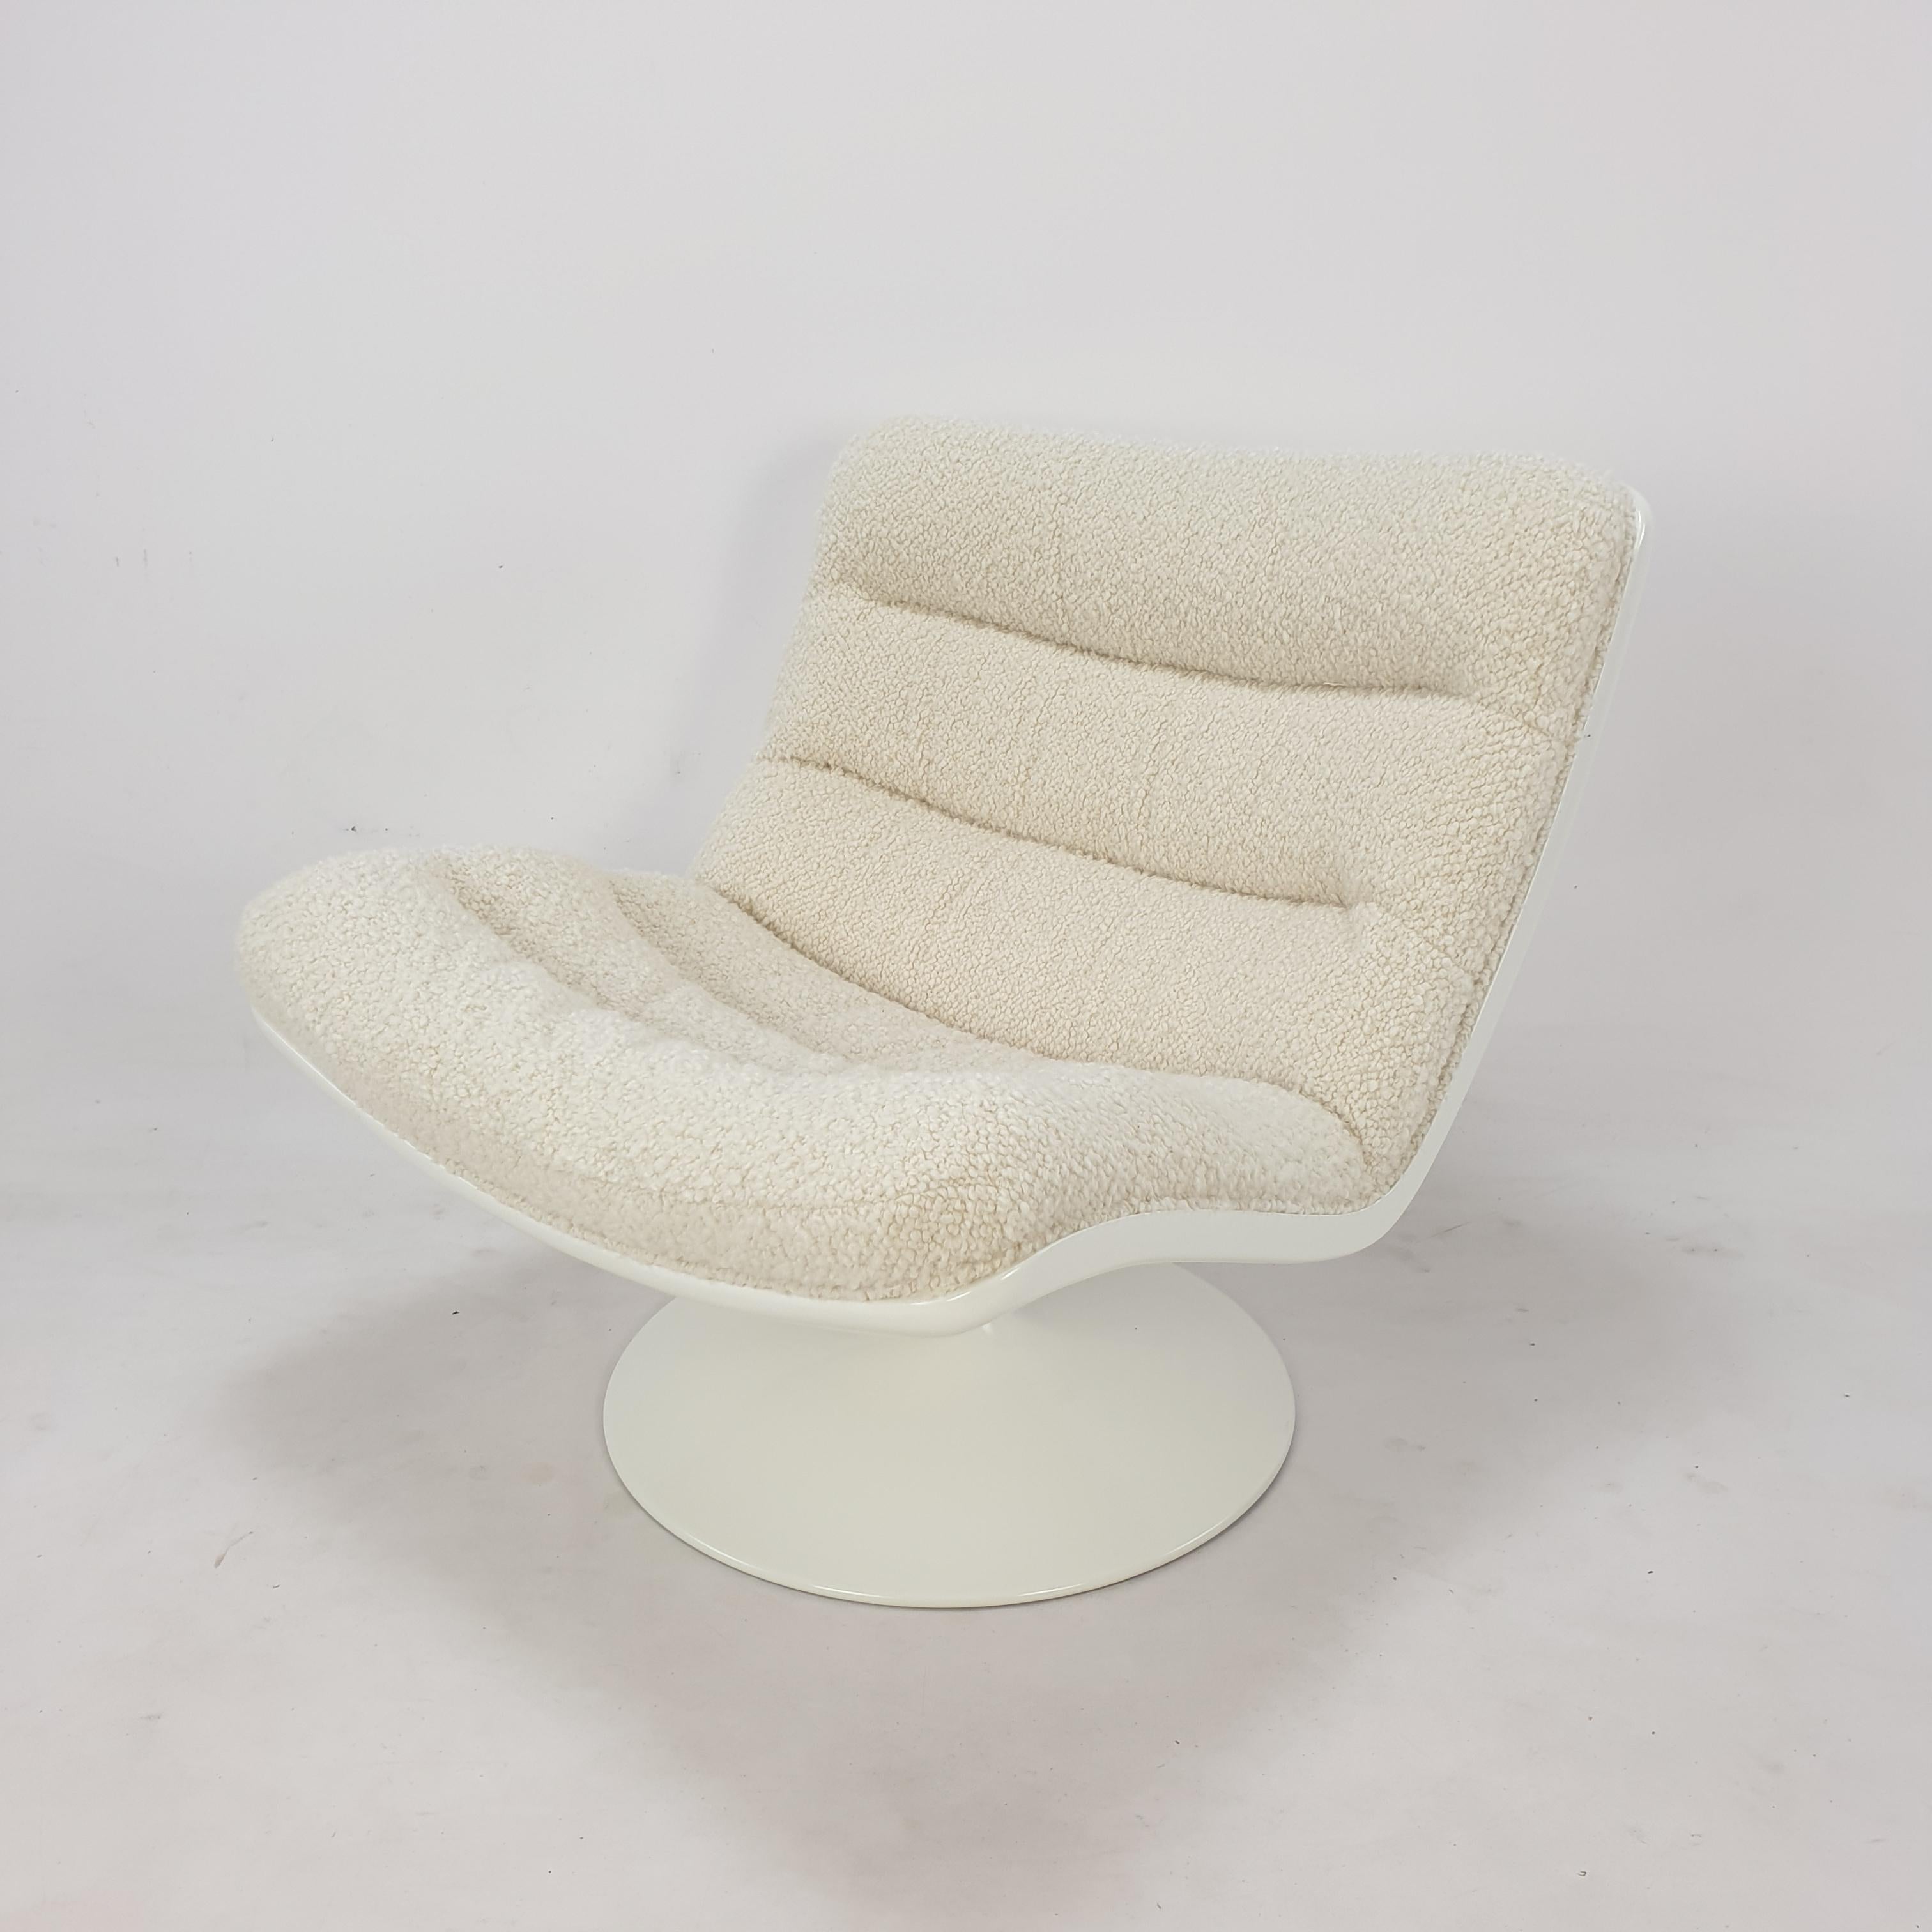 This very comfortable model 975 lounge chair is designed by Geoffrey Harcourt for Artifort in the 60's., 

It is just restored with new foam and new stunning Italian wool bouclé fabric. 

The foot and the structure are painted by a